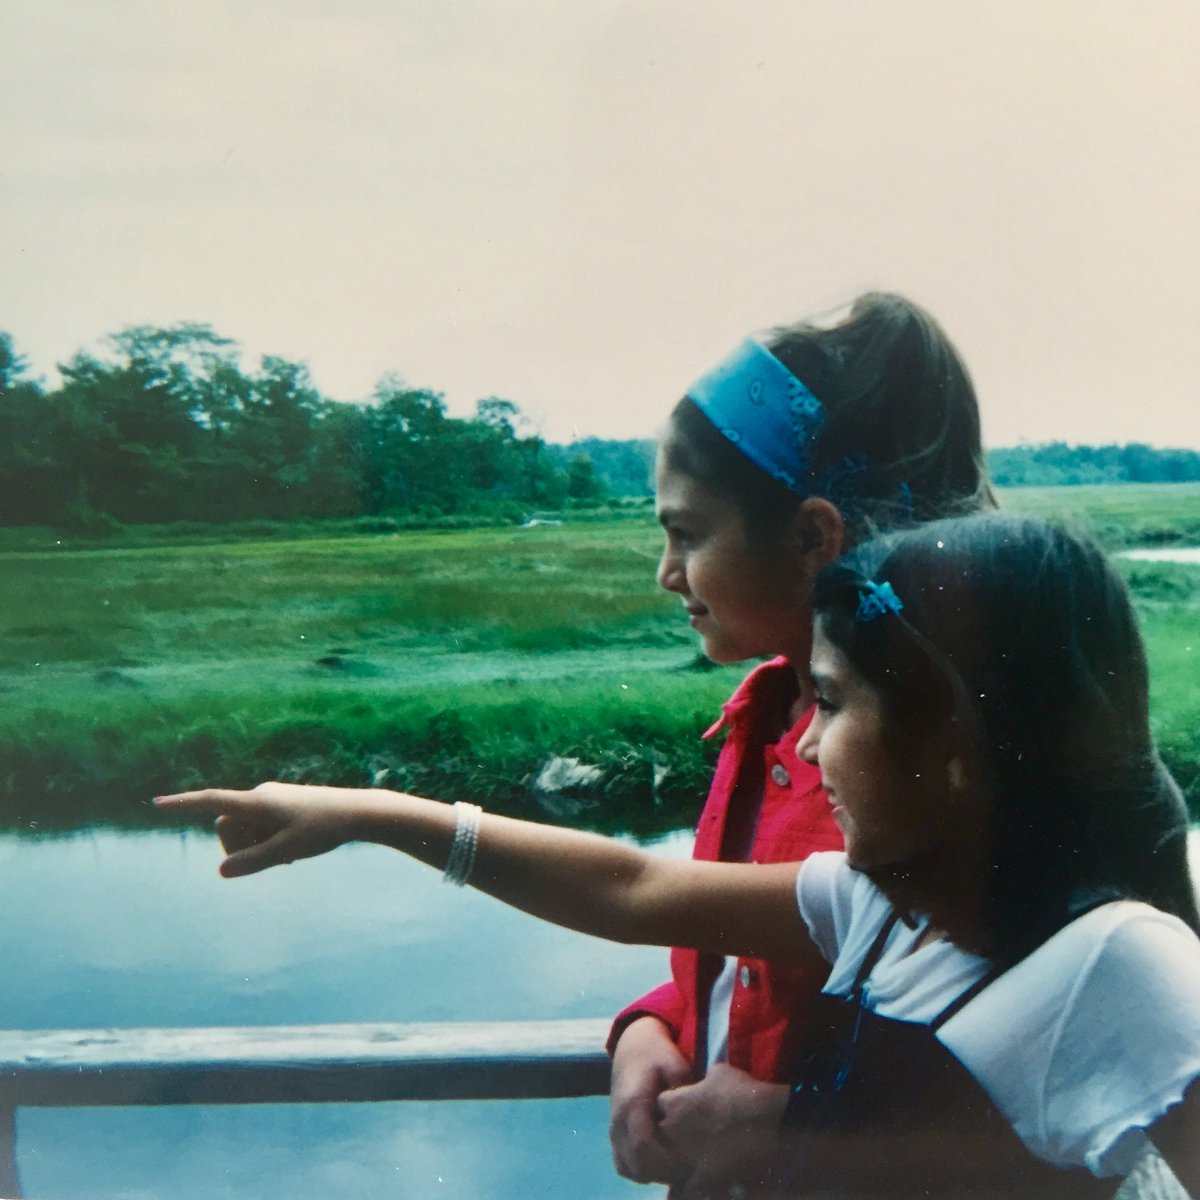 in the marshes of Maine #tbt https://t.co/iFeneFUMm5